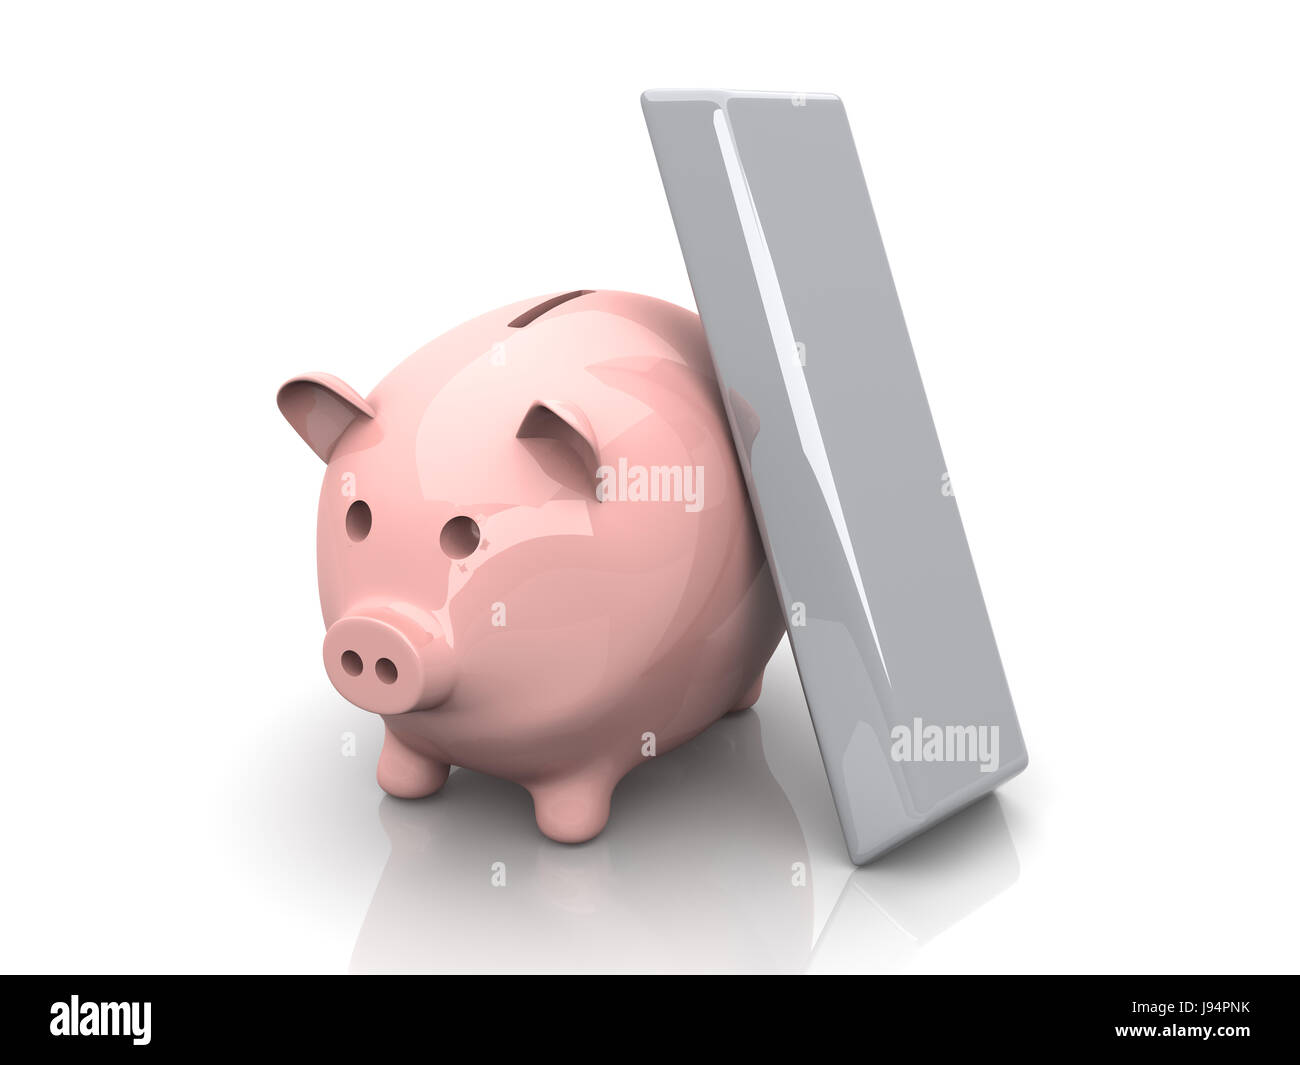 bank, lending institution, isolated, currency, graphic, silver, save, toy, Stock Photo